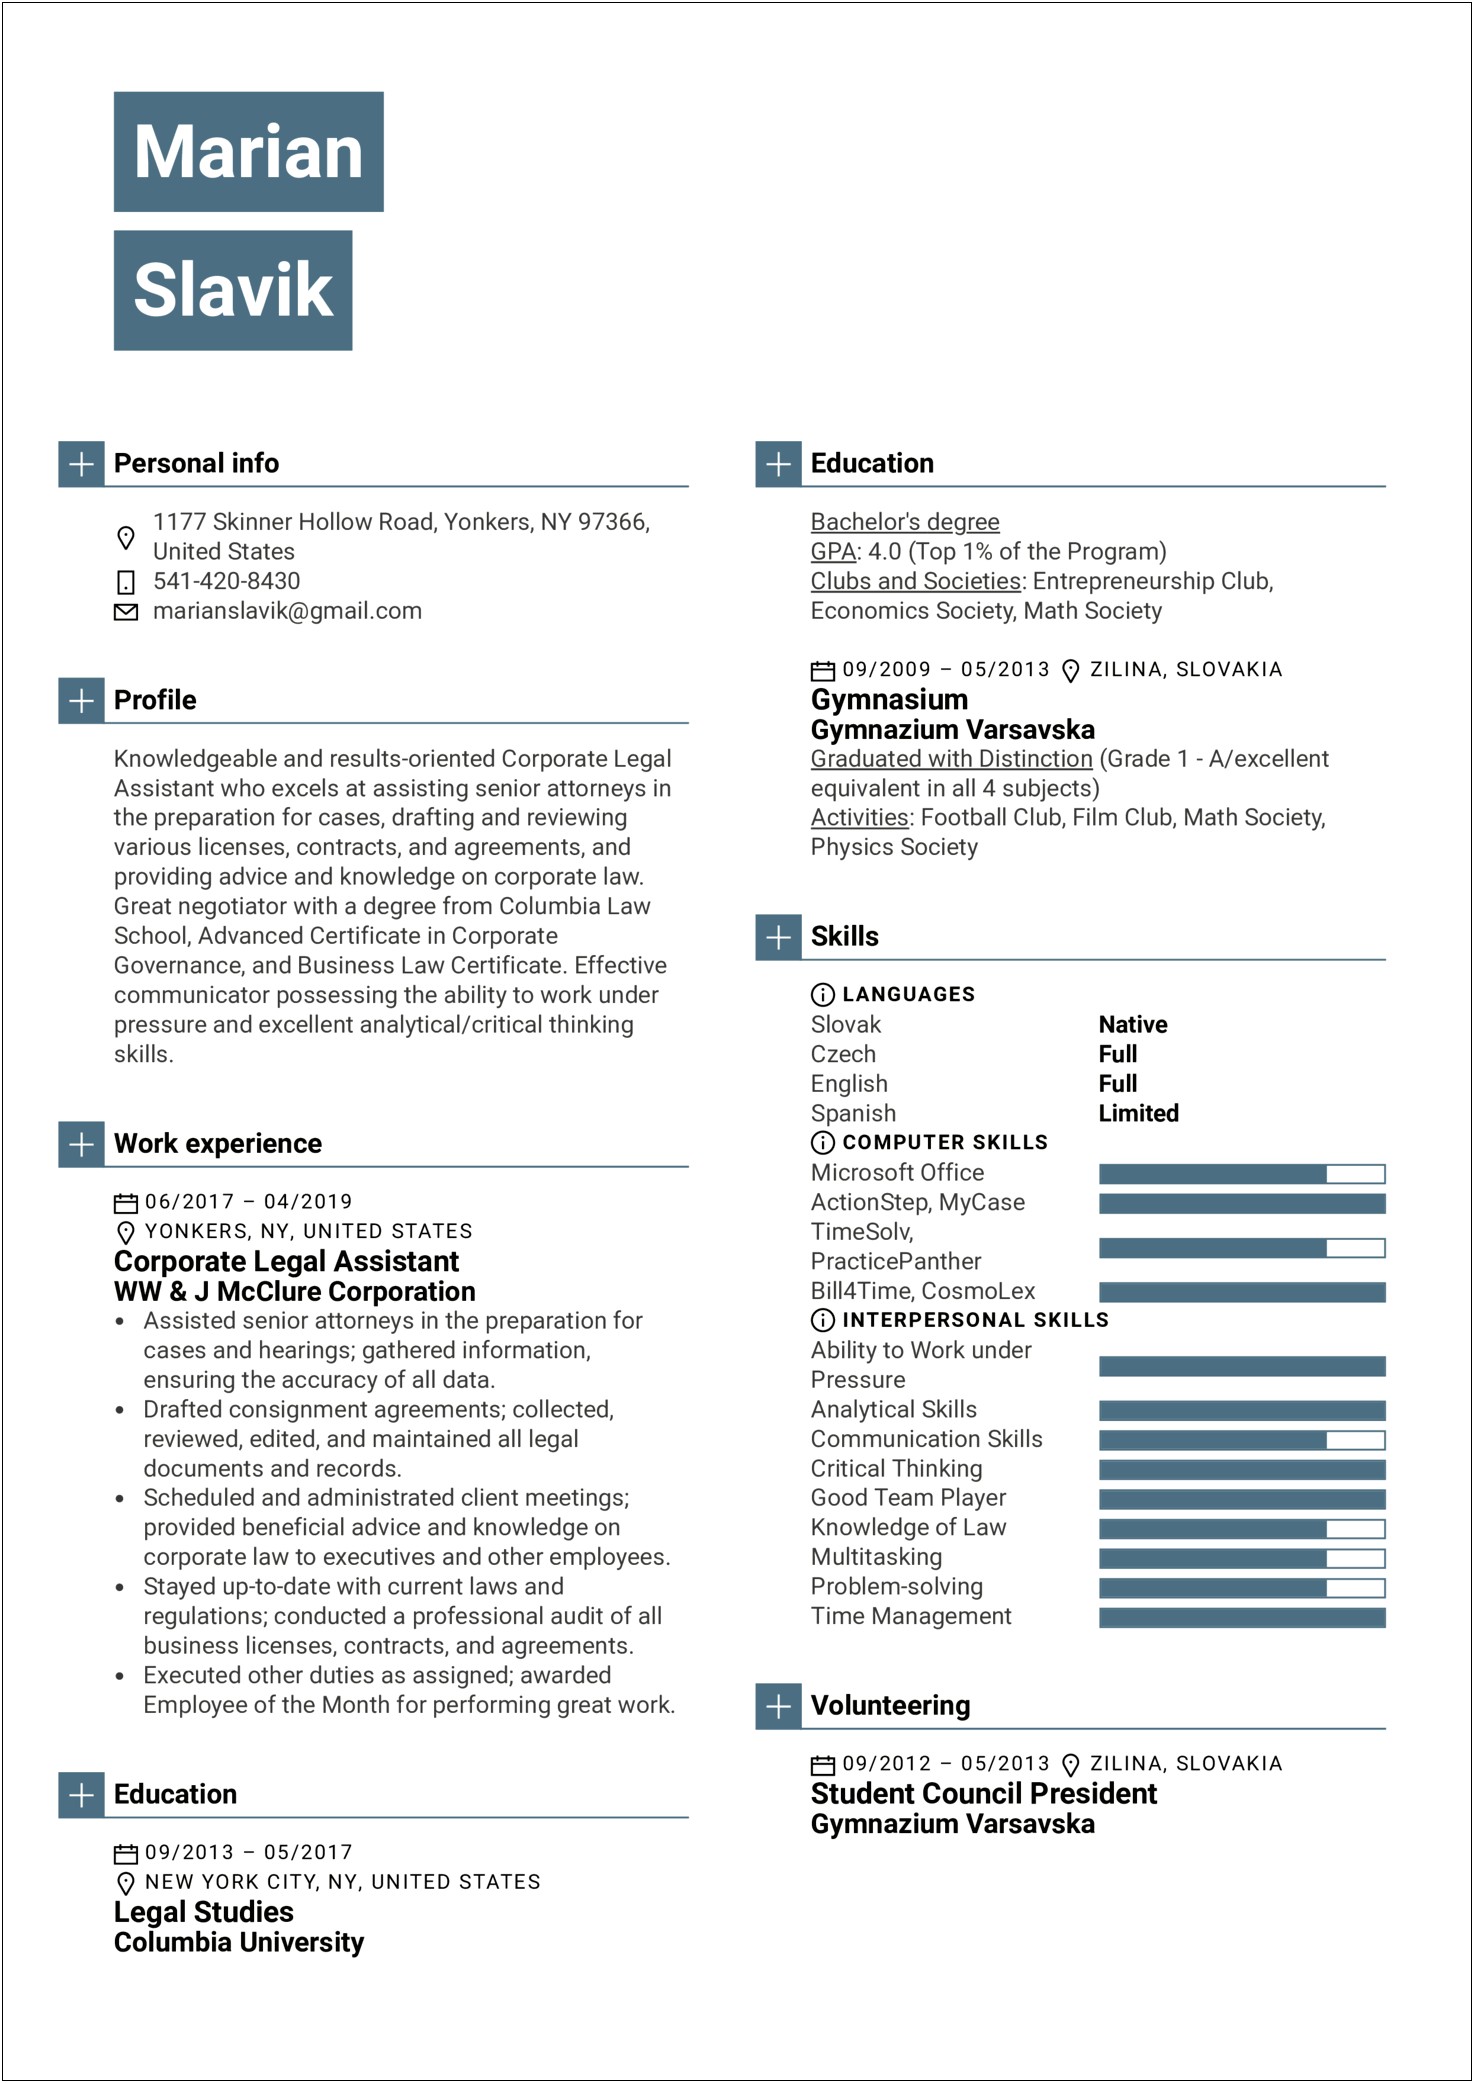 Best Legal Resume For Tech Companies